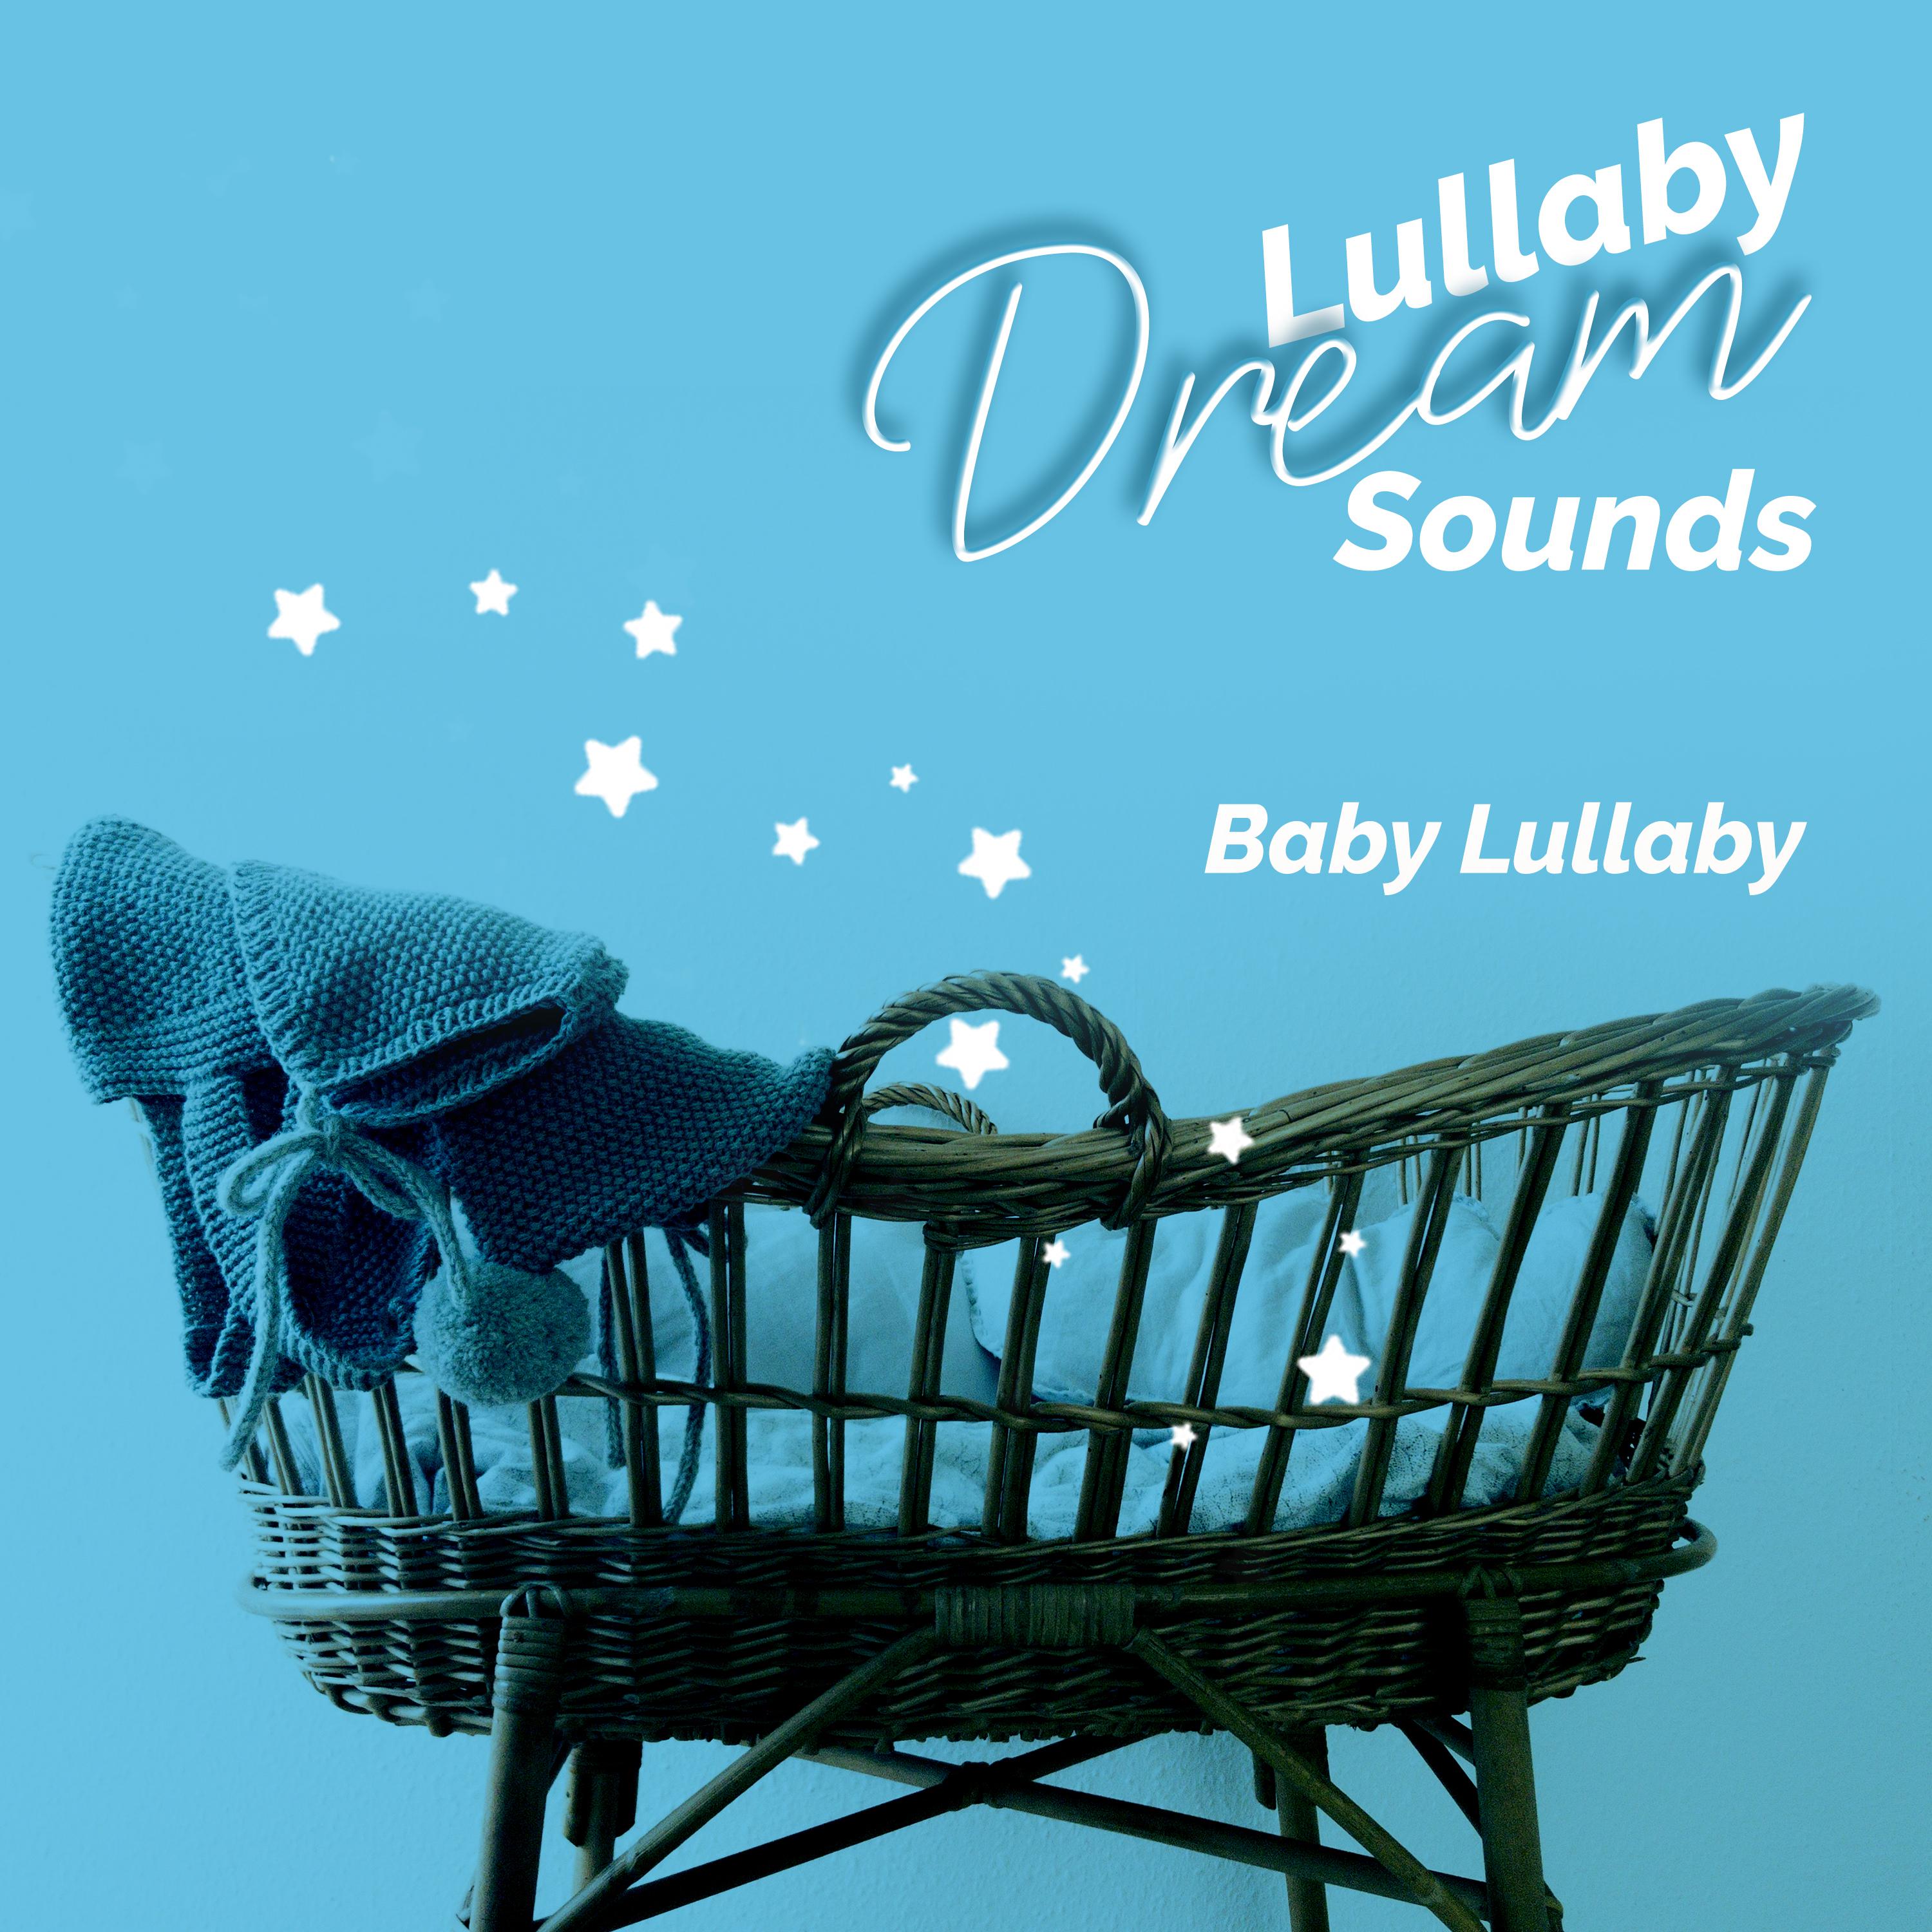 Lullaby Dream Sounds